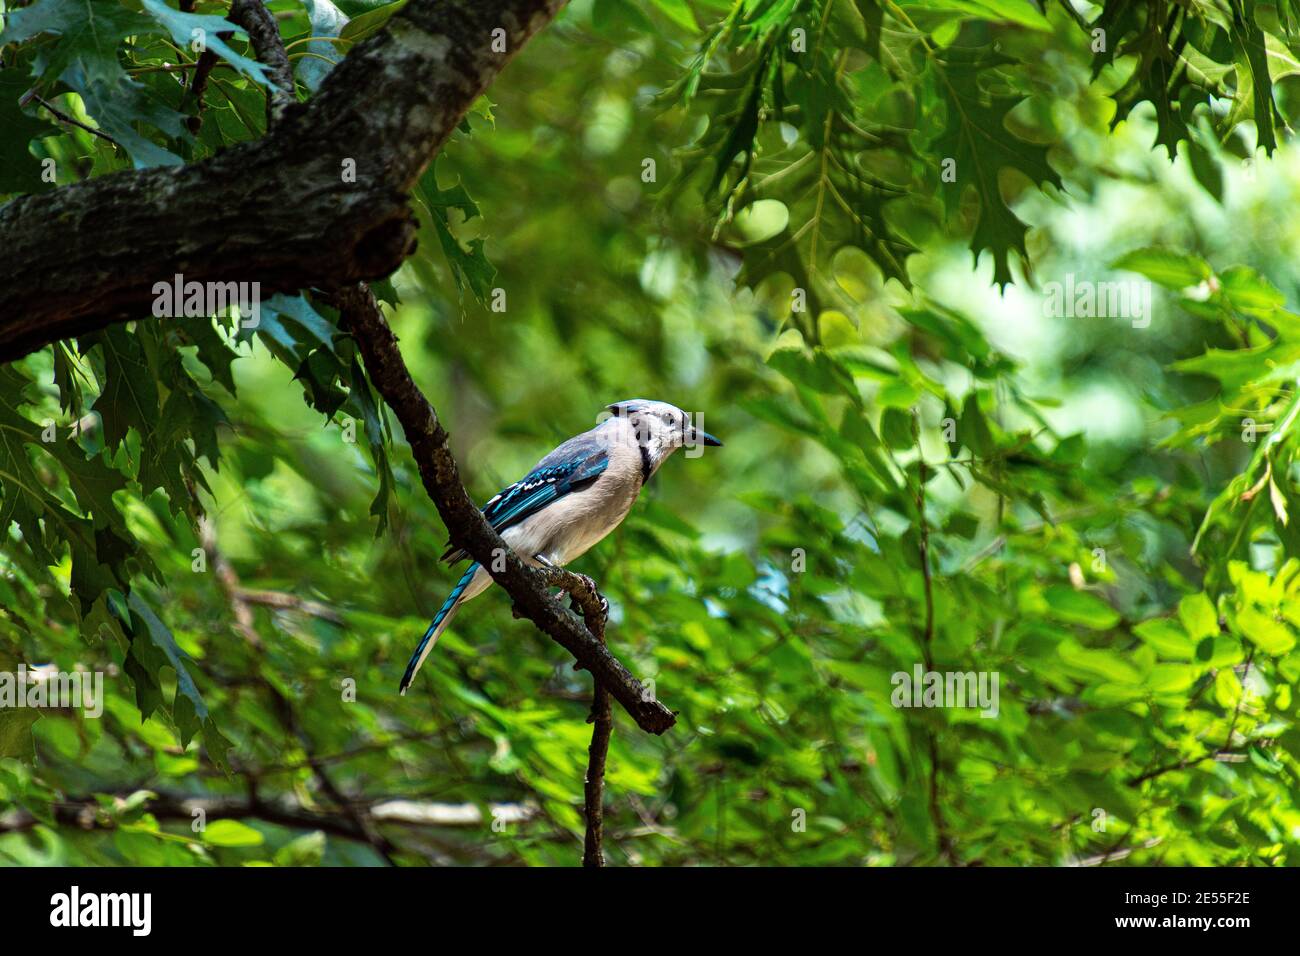 Selective focus shot of a Blue jay perched on a tree branch Stock Photo